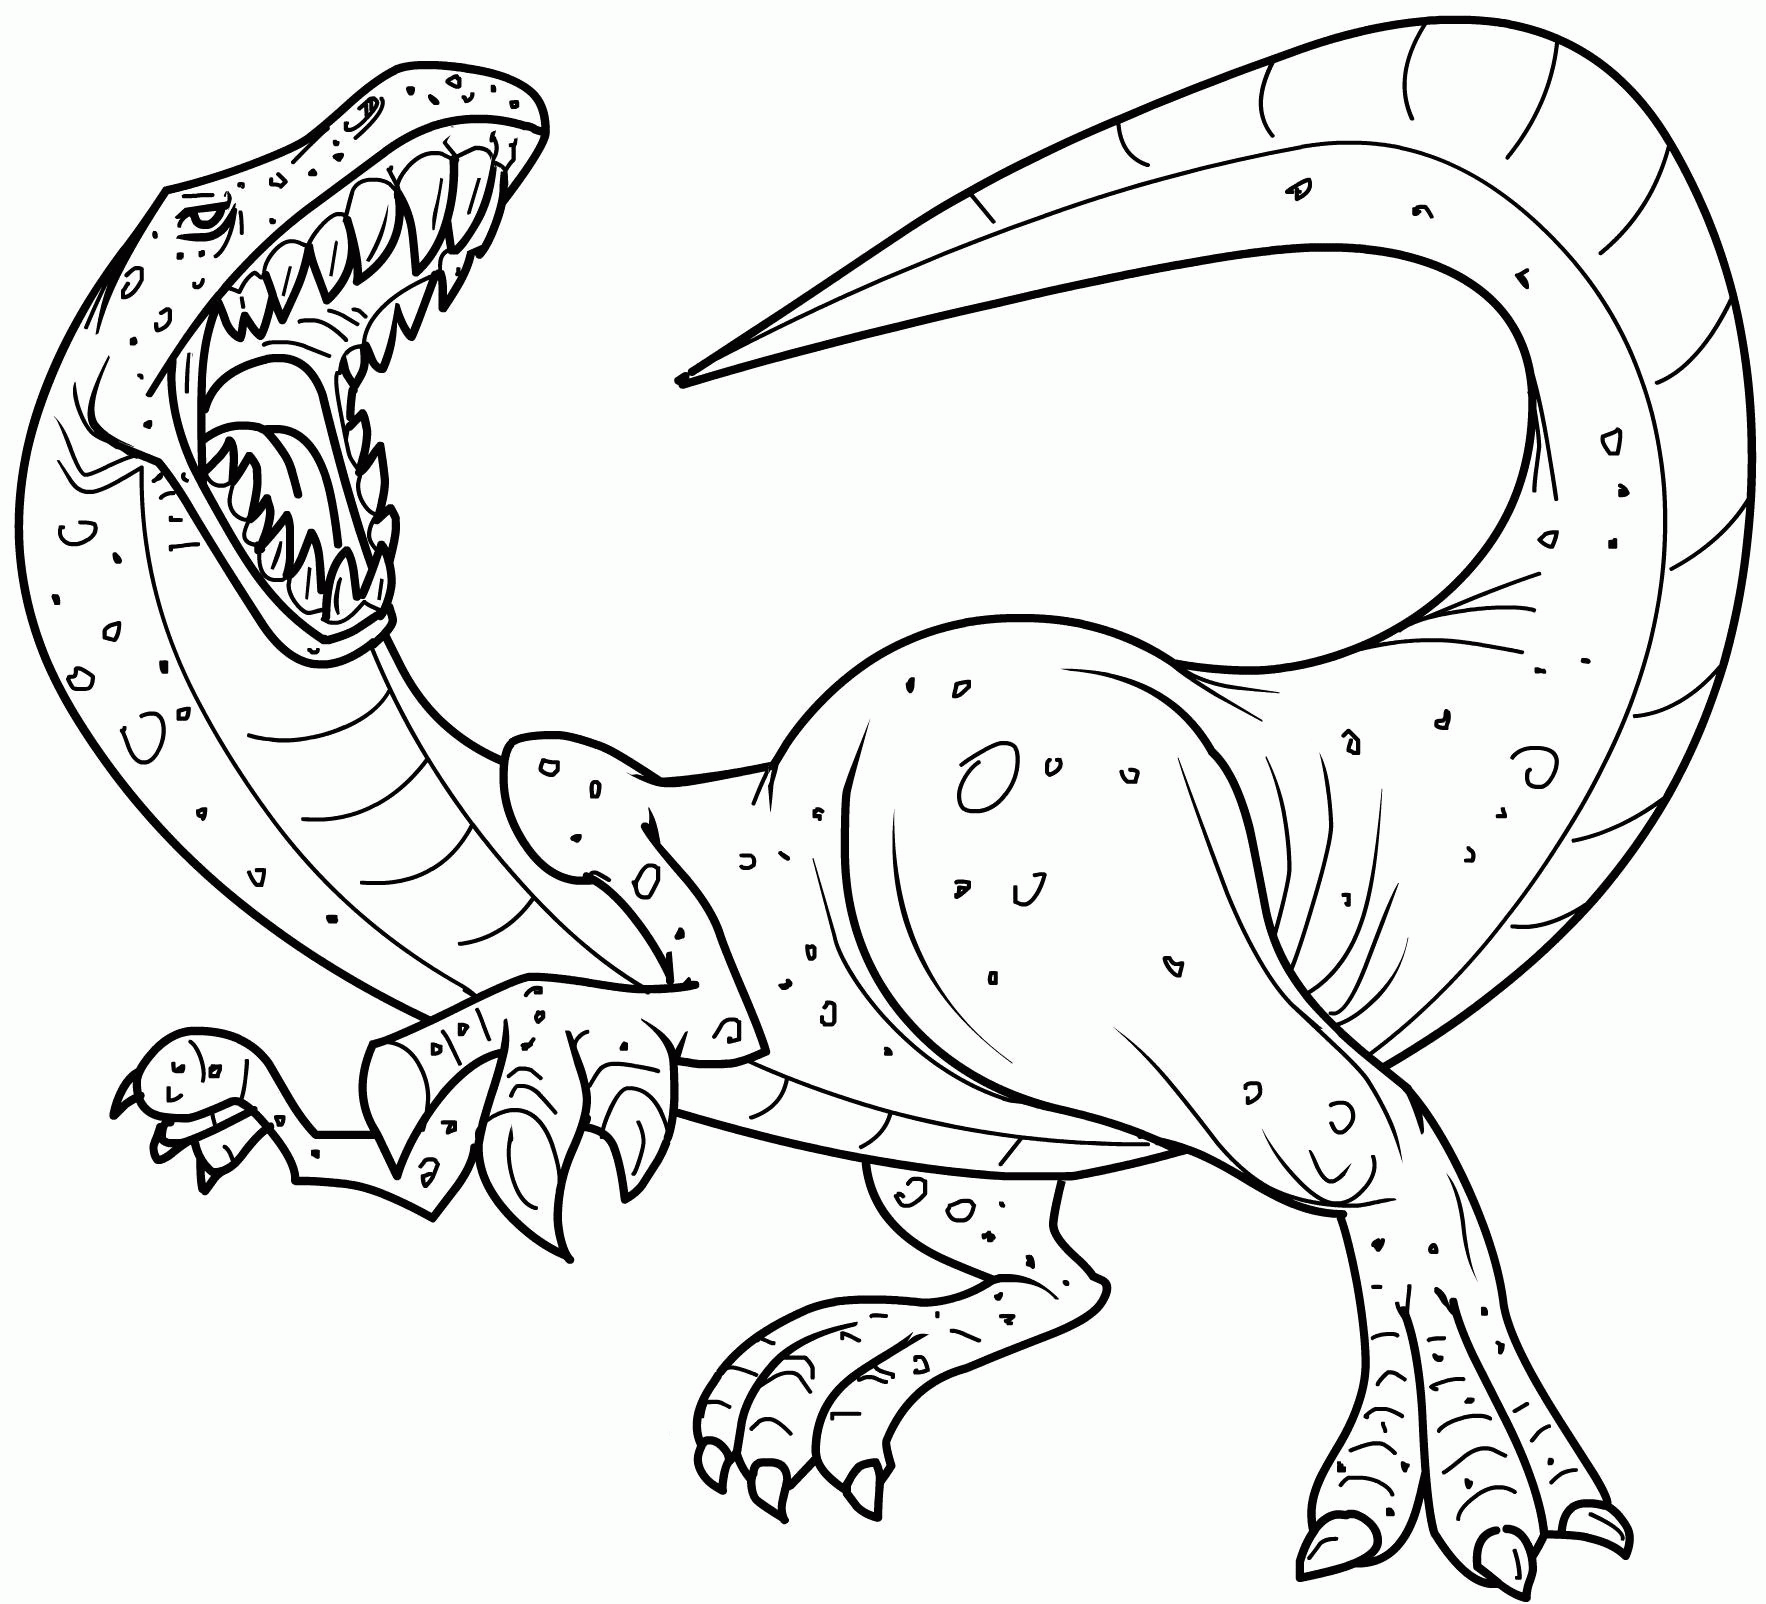 finest giui for dinosaur coloring pages. dinosaurs coloring pages ...